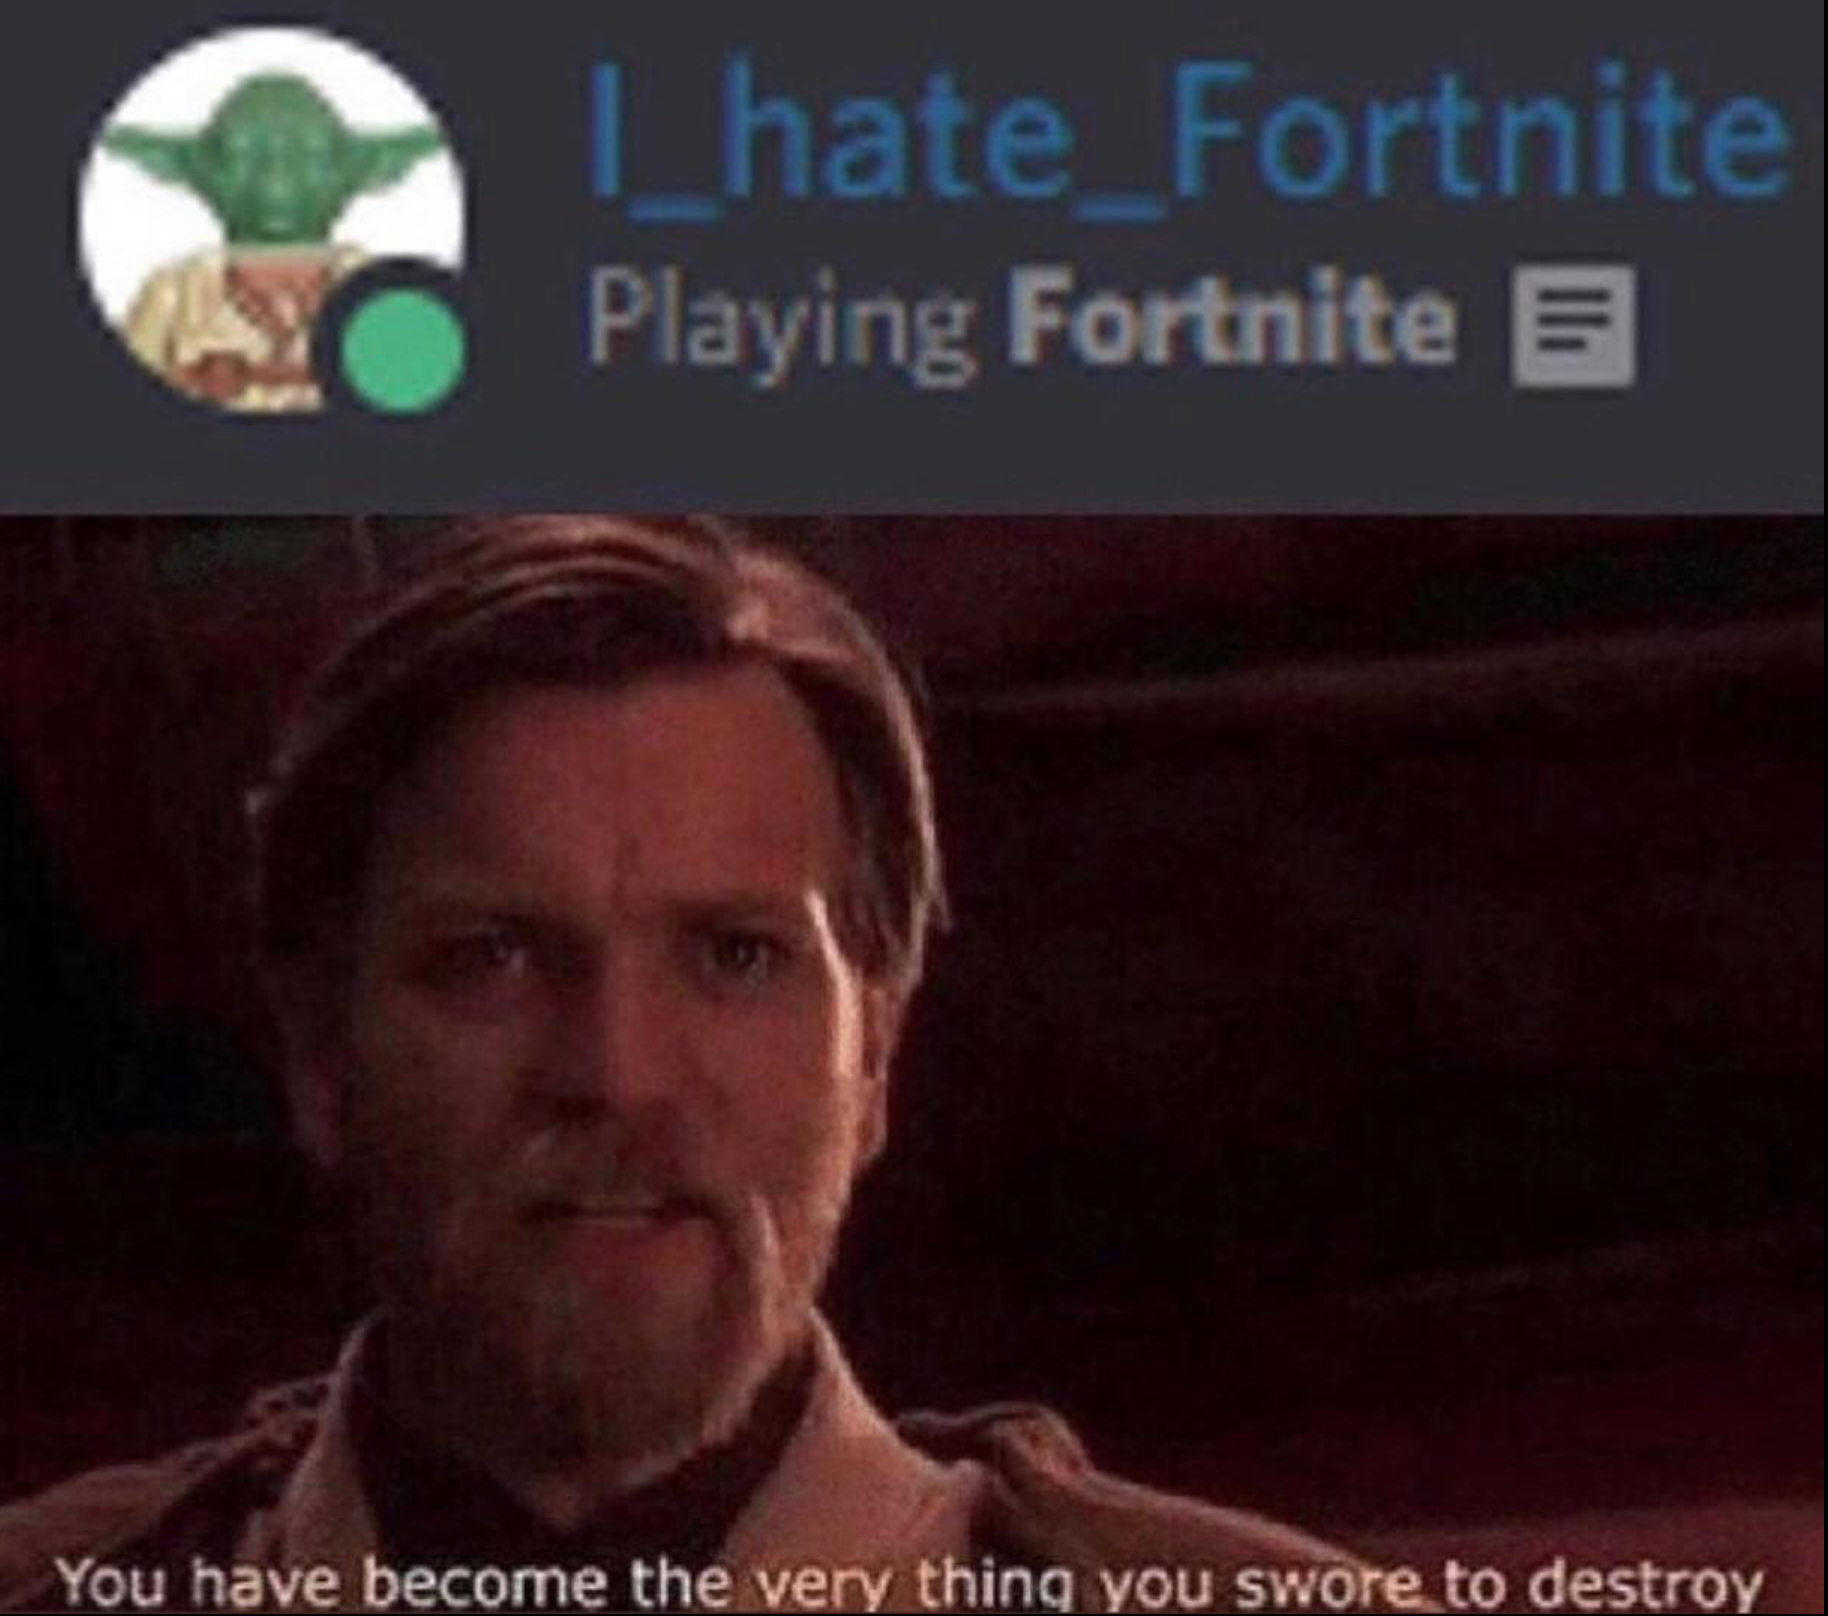 gaming memes - you ve become the very thing you ve sworn to destroy - I hate Fortnite Playing Fortnite B You have become the very thing you swore to destroy